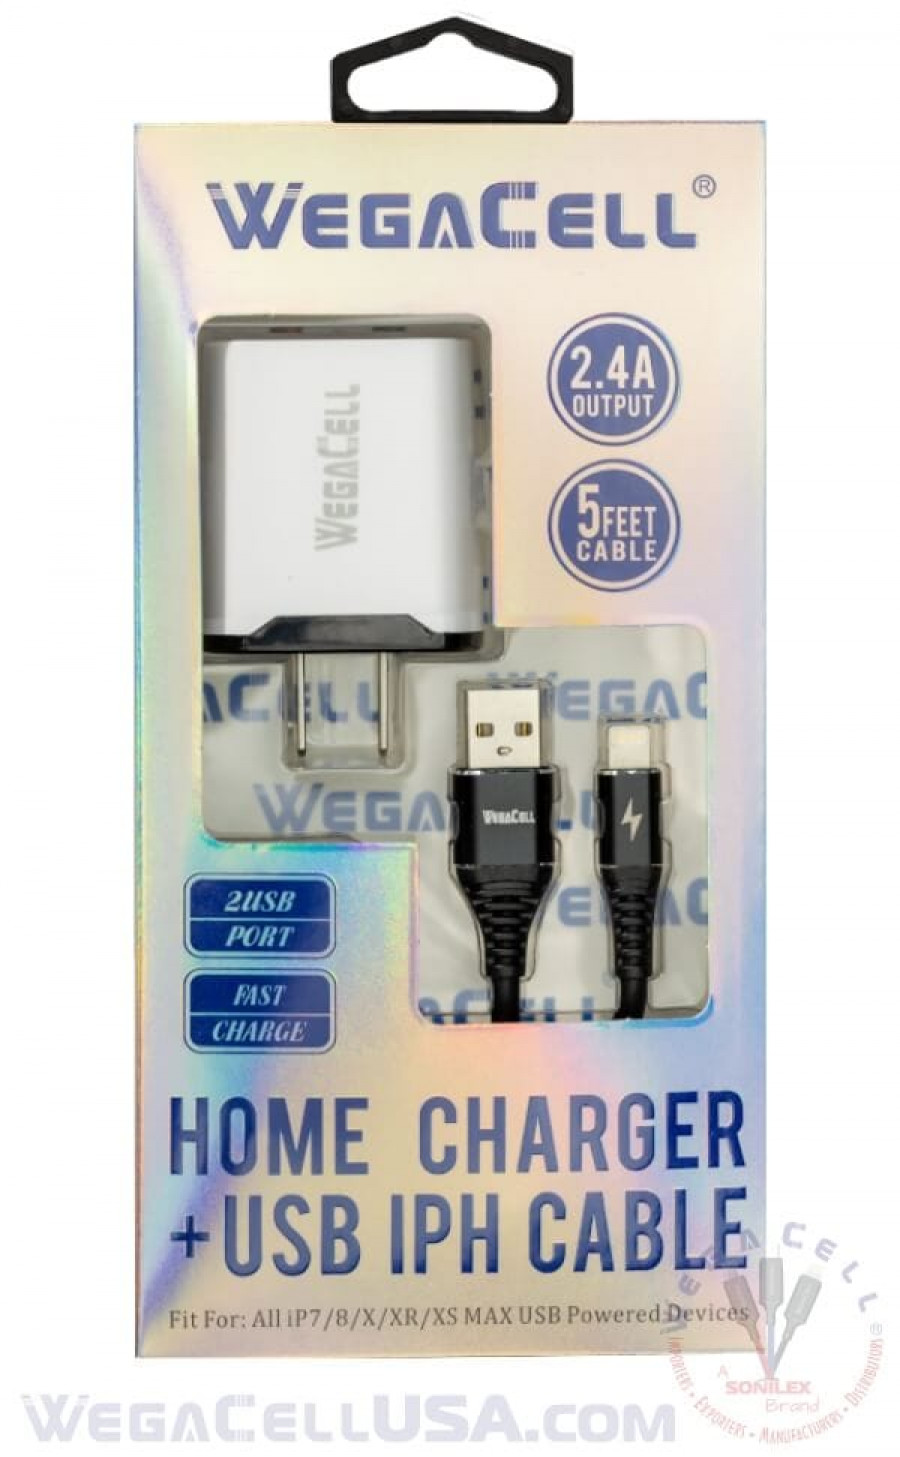 apple compatible universal dual port wall charger lightning cable combo - wholesale pkg. wegacell: wl-1602iph-2hc data cable charger combo 26